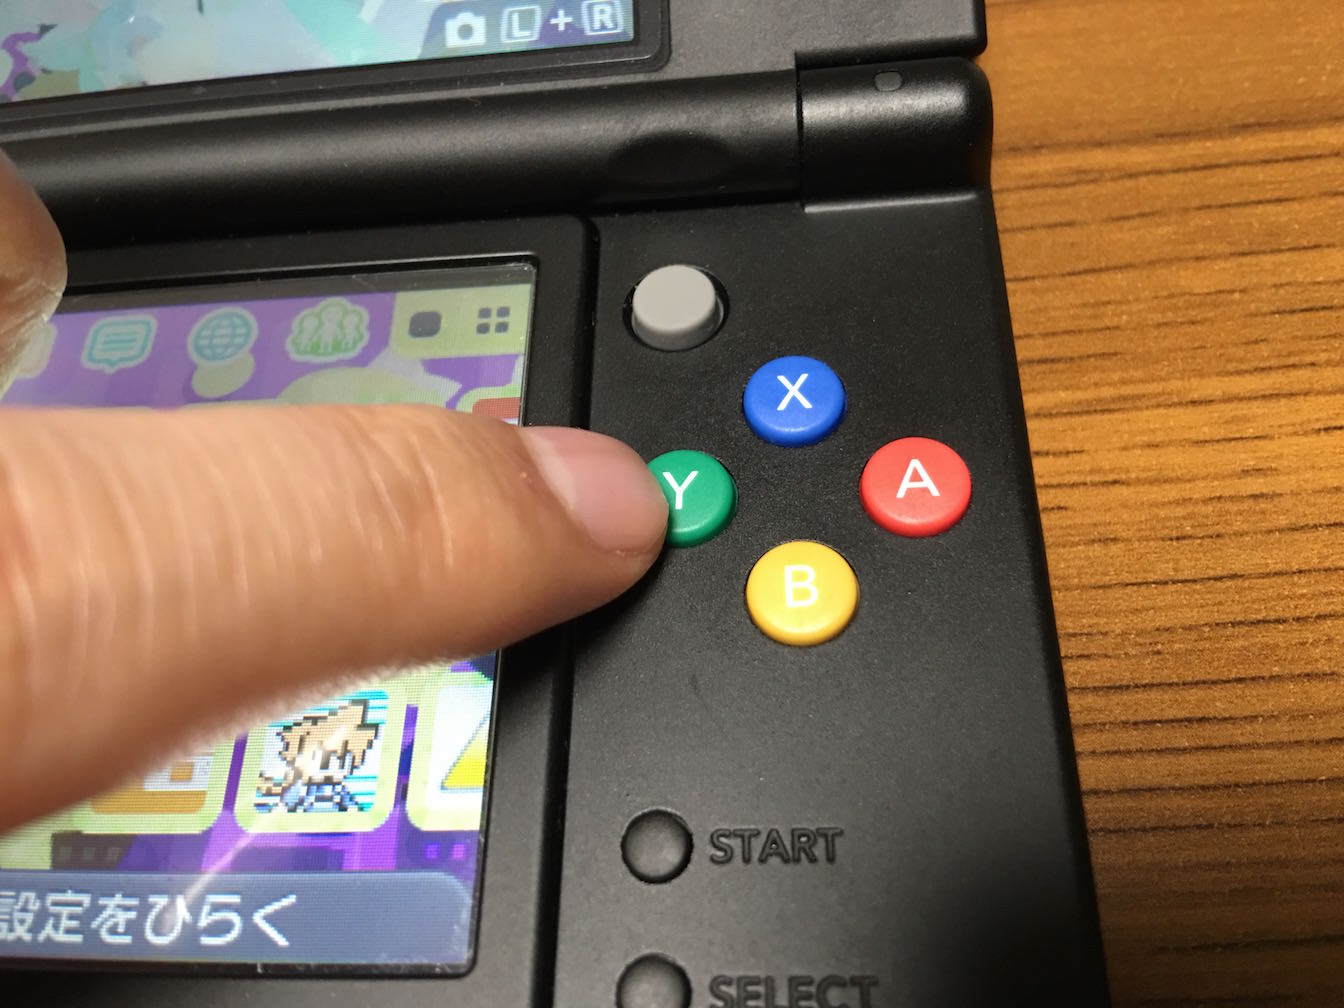 How to take screen shots at nintendo 3ds 2